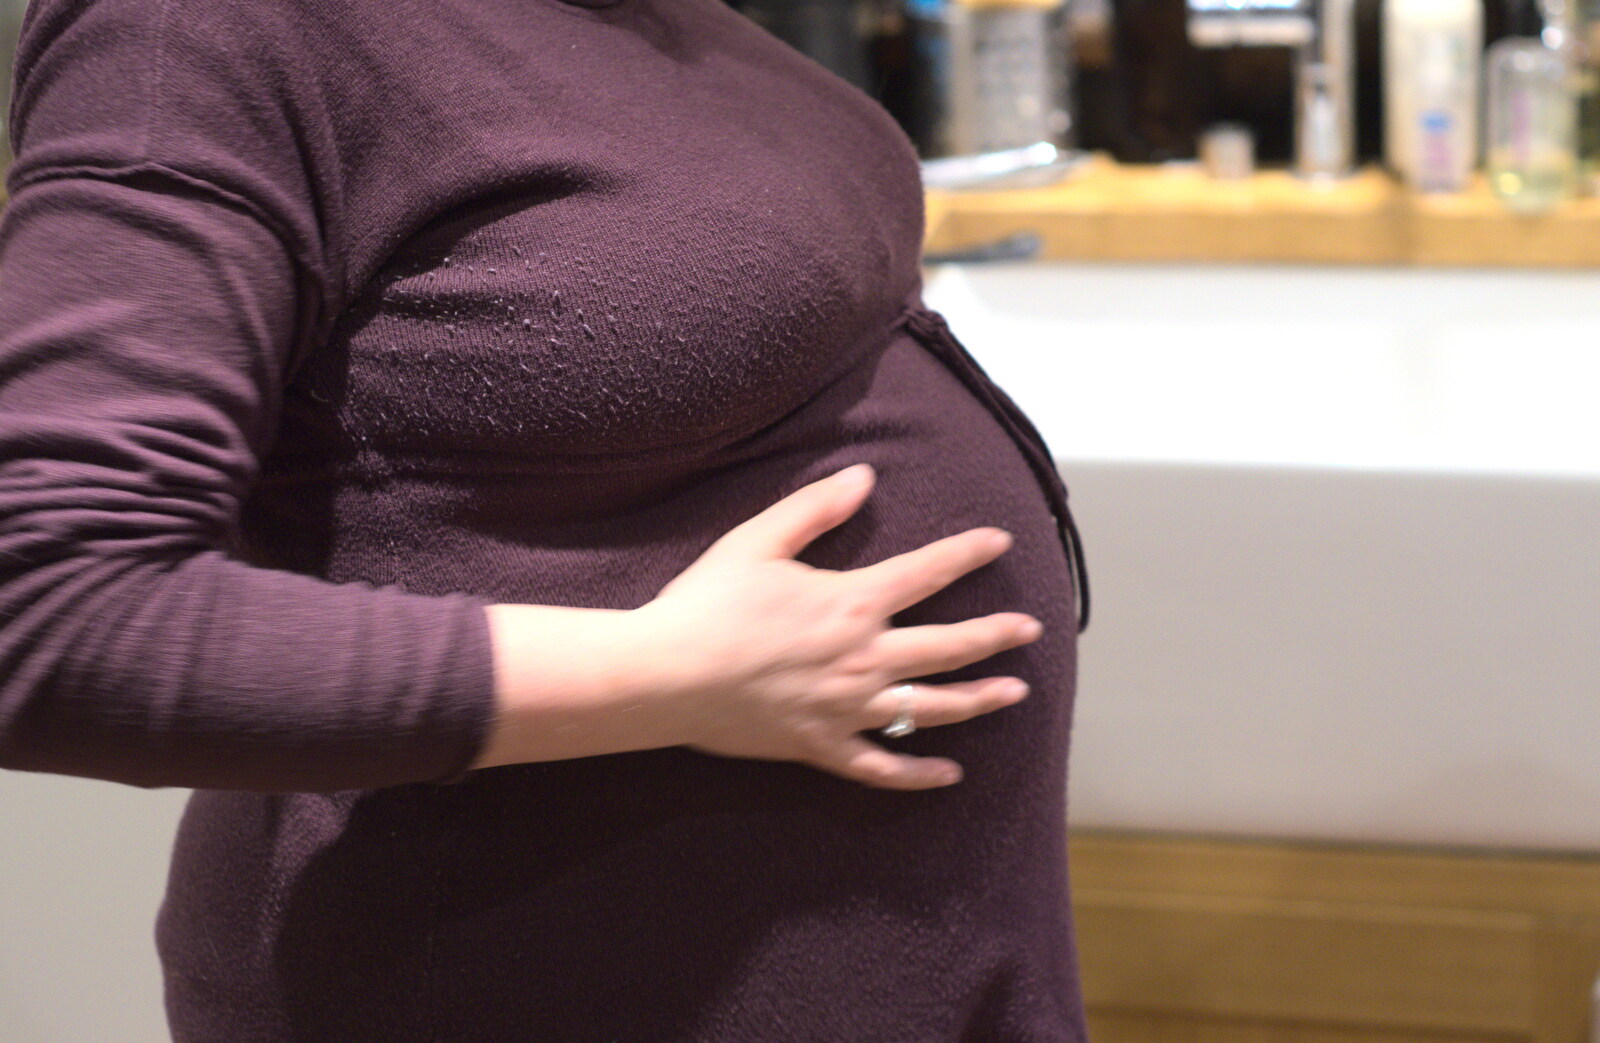 The bump increases from The Bump, TouchType at Nandos, and Isobel does London - 3rd February 2012